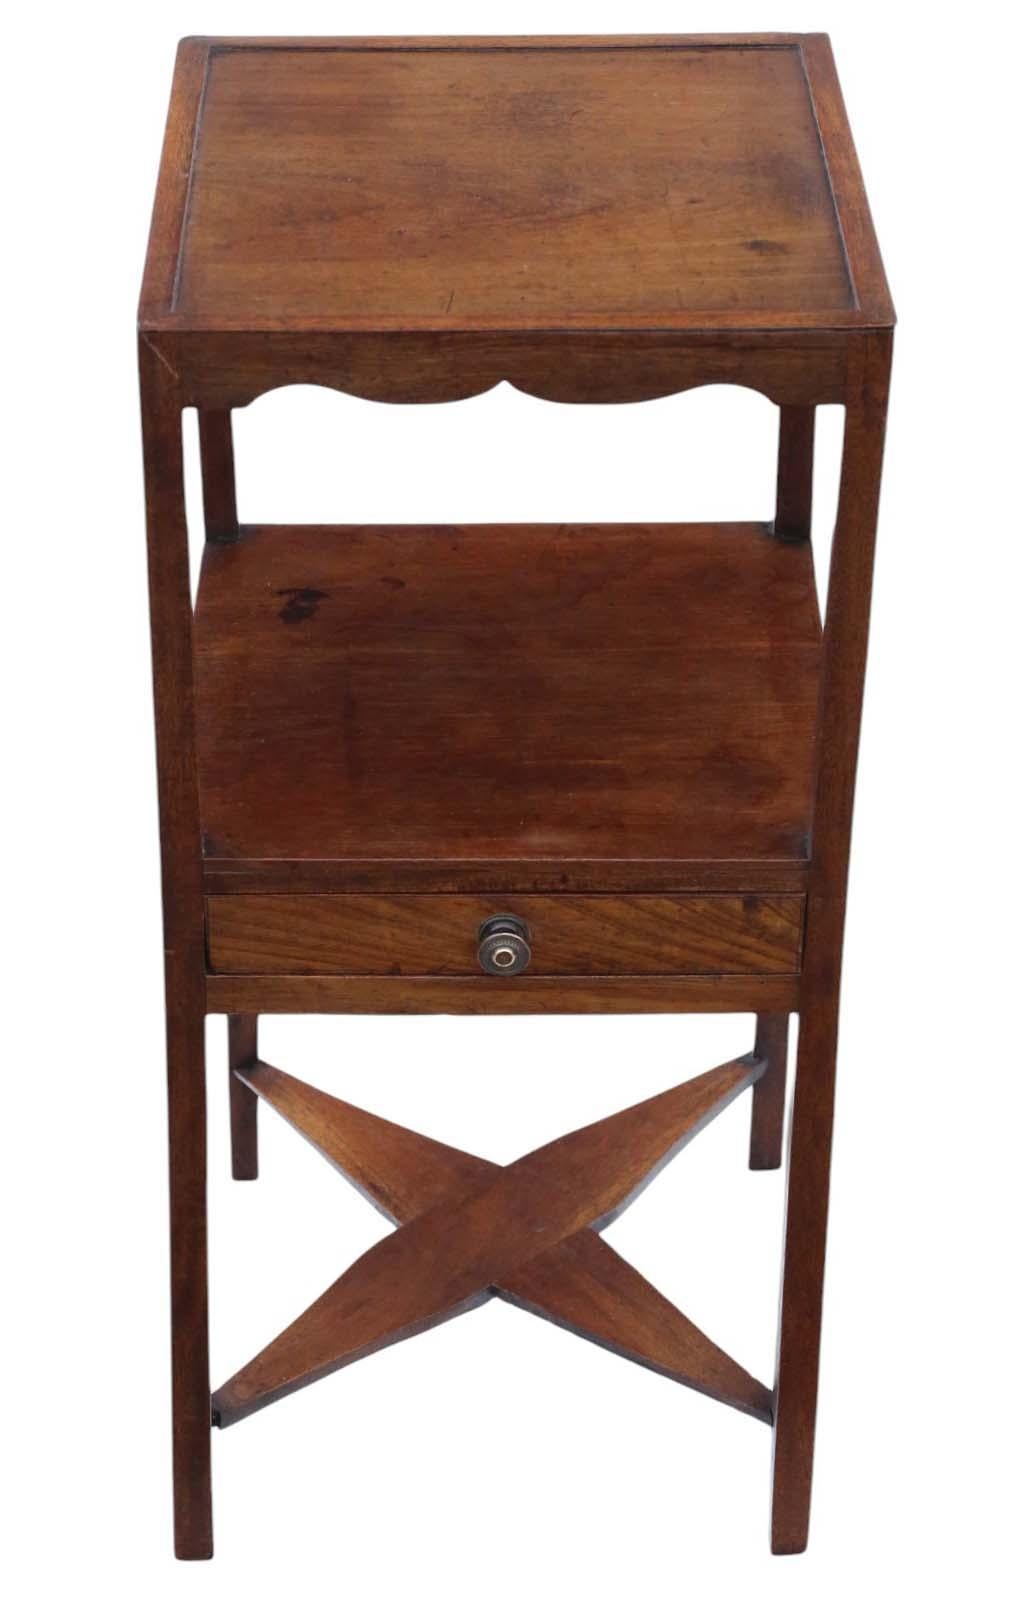 Genuine early 19th Century mahogany nightstand, versatile as a washstand or bedside table from the Georgian era.

This exceptional piece features solid construction with no loose joints or woodworm damage. The drawer carcass, while later, retains